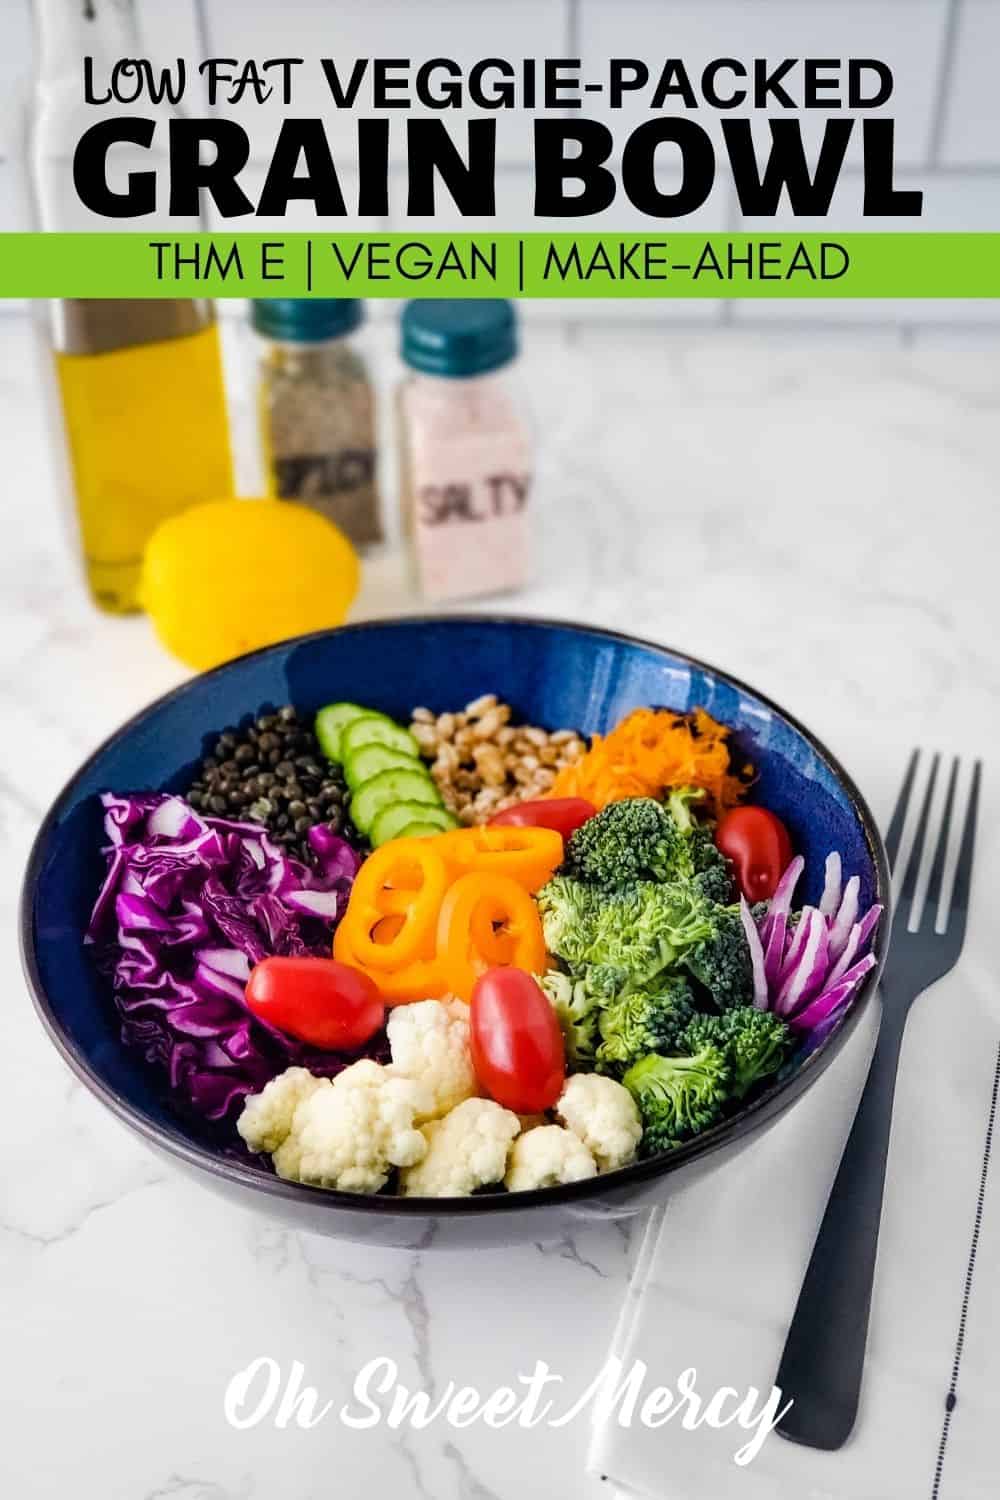 This flavorful veggie-packed grain bowl is full of flavor and nutrition, not fat! They're a fabulous meatless THM E option, and perfect for all that delicious summer produce. Perfect for lunches and make-ahead meal prep, too. #lowfat #healthycarbs #grainbowl #buddahbowl #hippiebowl #thm #meatless #vegan #vegetarian #plantbased @ohsweetmercy